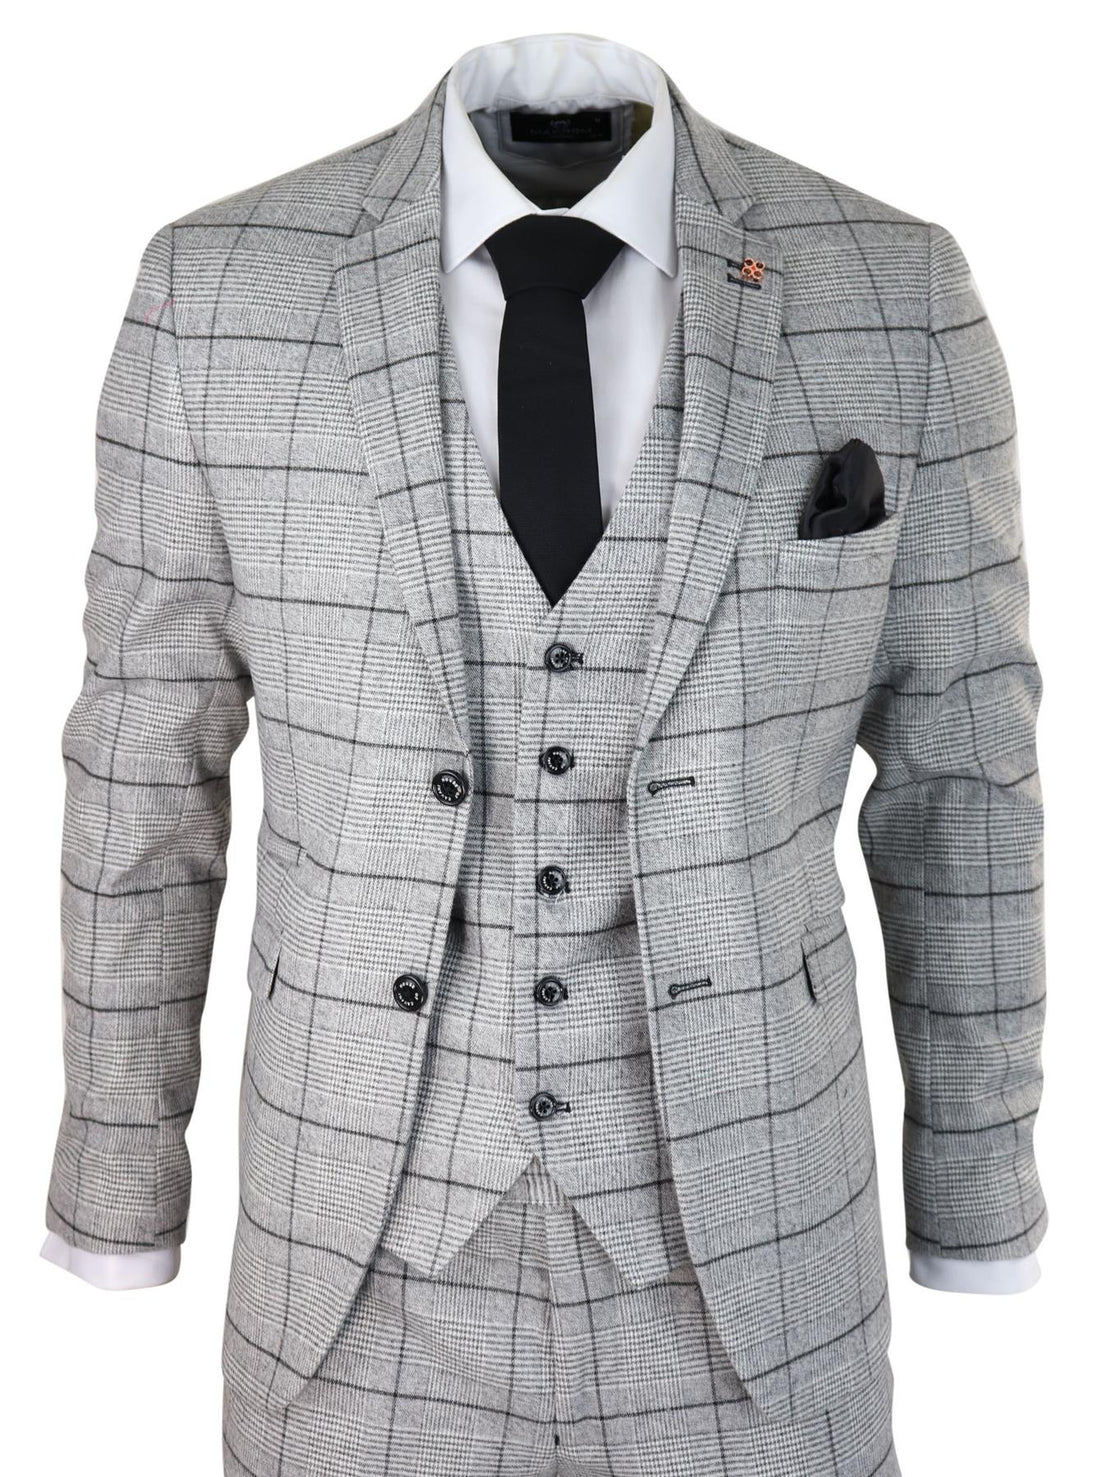 Mens 3 Piece Tweed Suit Grey Check Peaky Blinders 1920 Gatsby Wedding Suit - Upperclass Fashions 